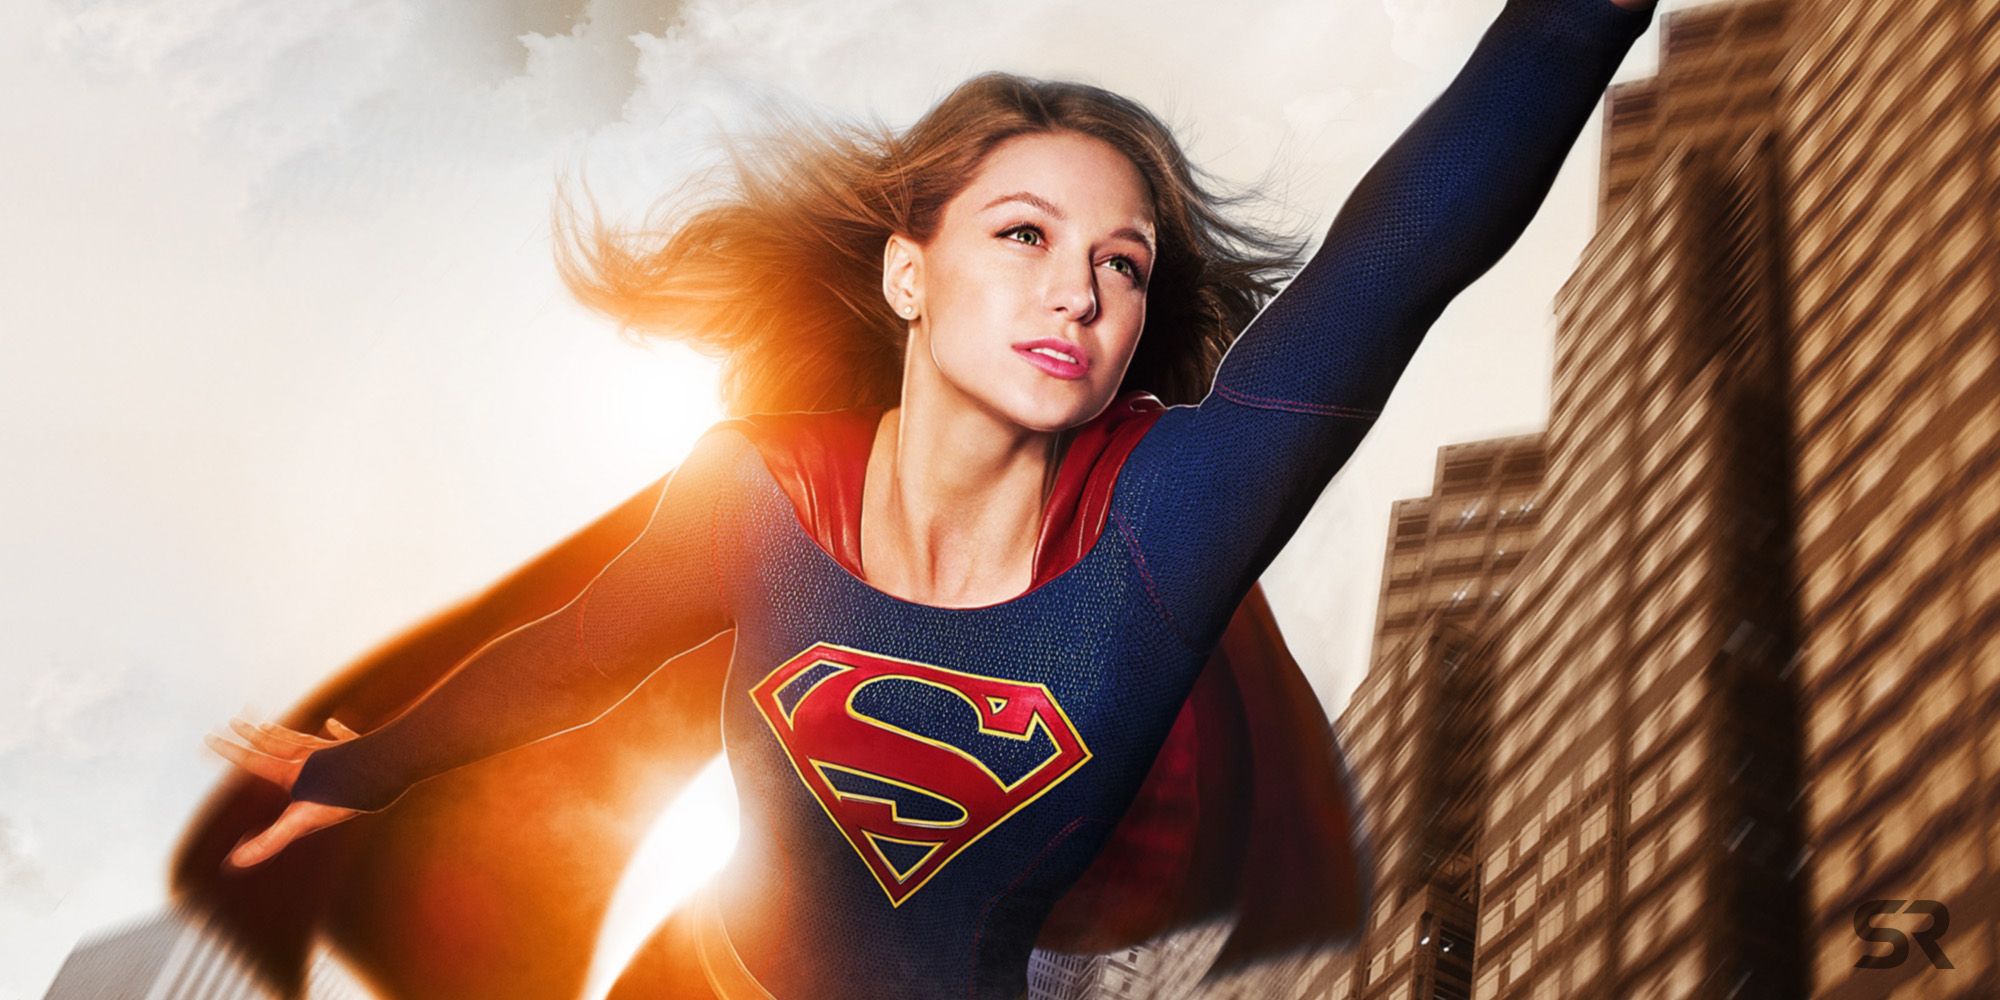 Supergirl flying through the skies.